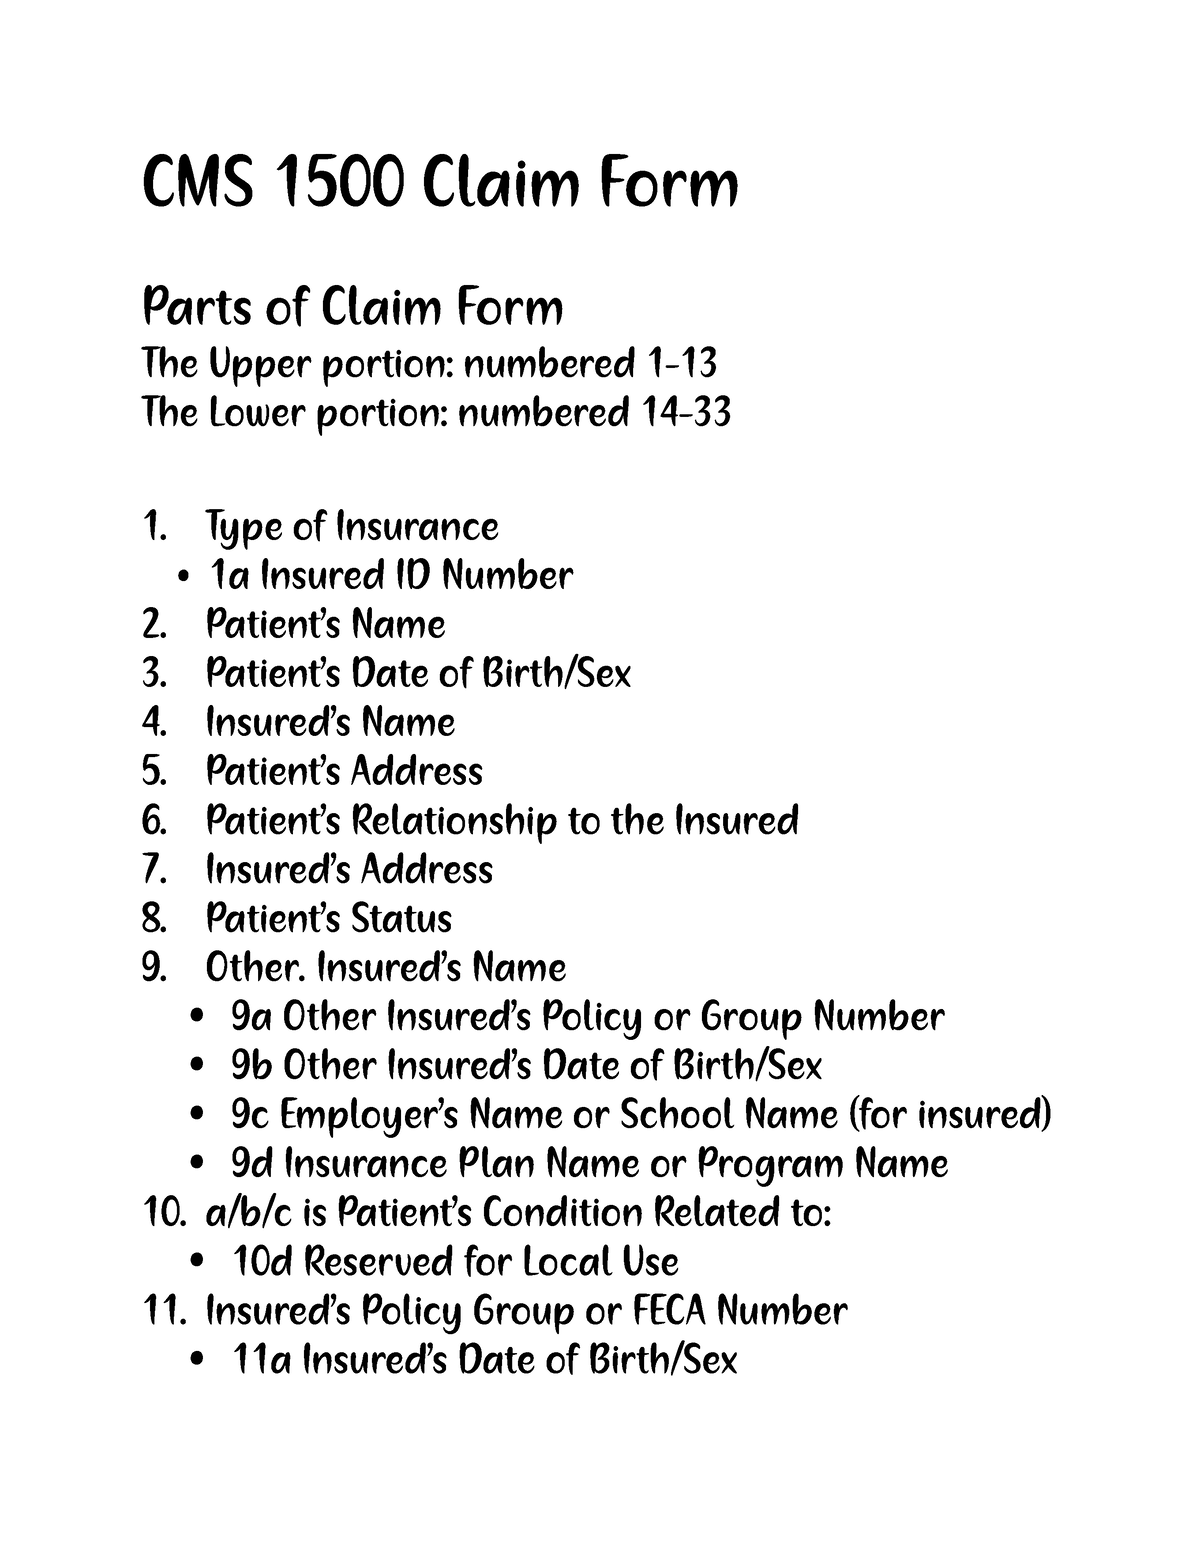 cms-1500-claim-form-cms-1500-claim-form-parts-of-claim-form-the-upper